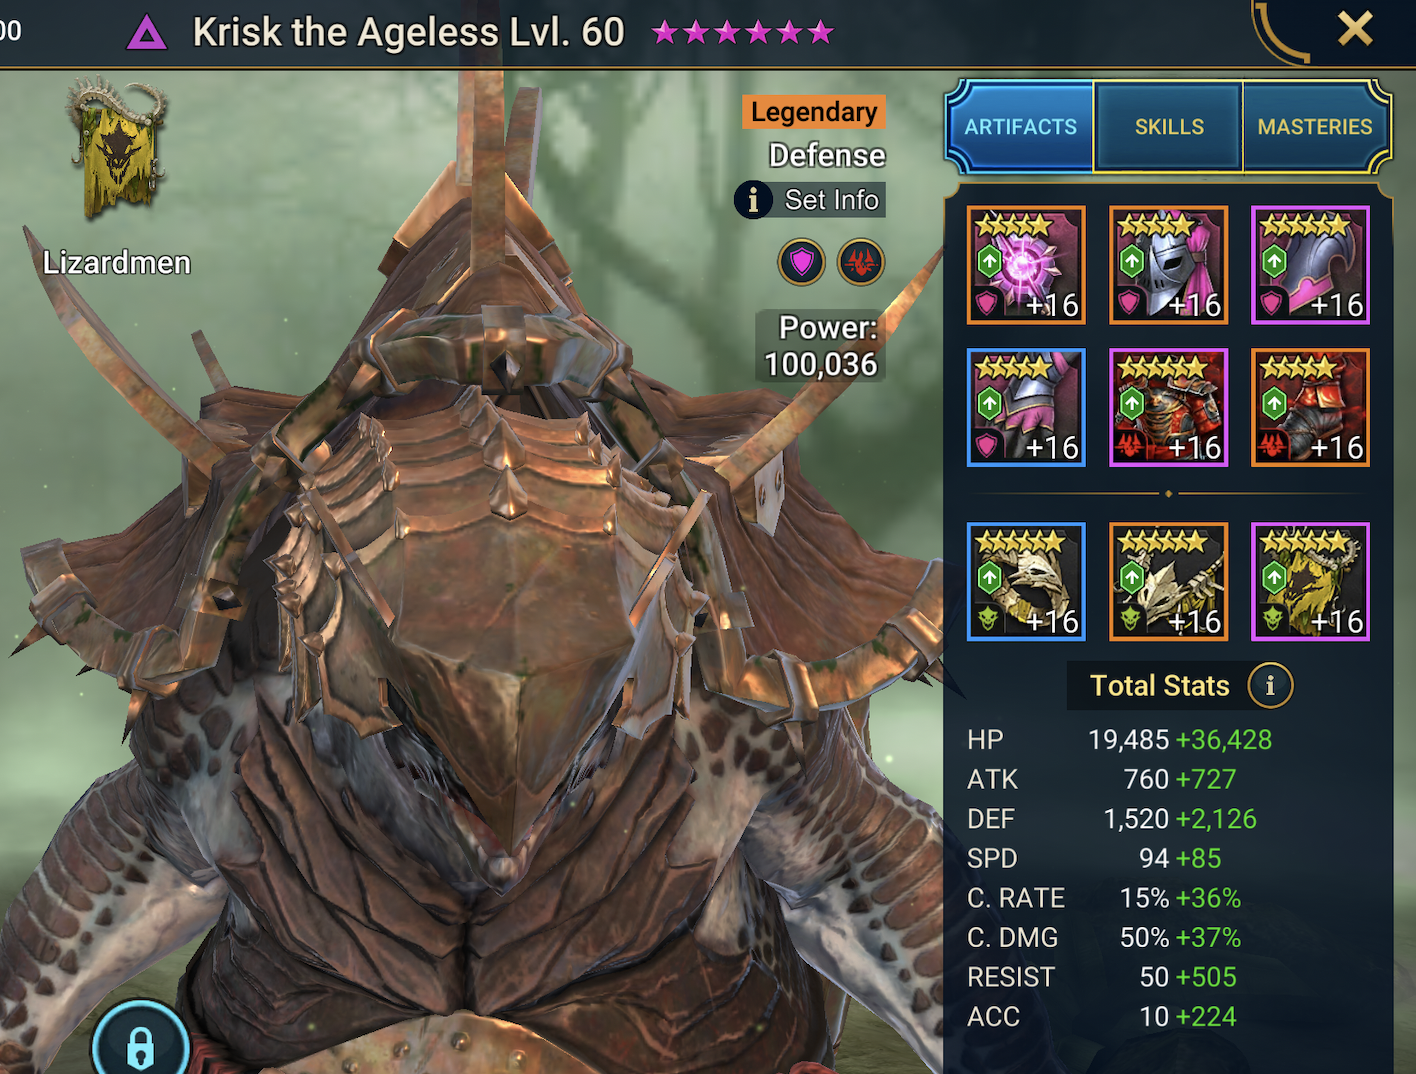 Krisk the Ageless gear and stats